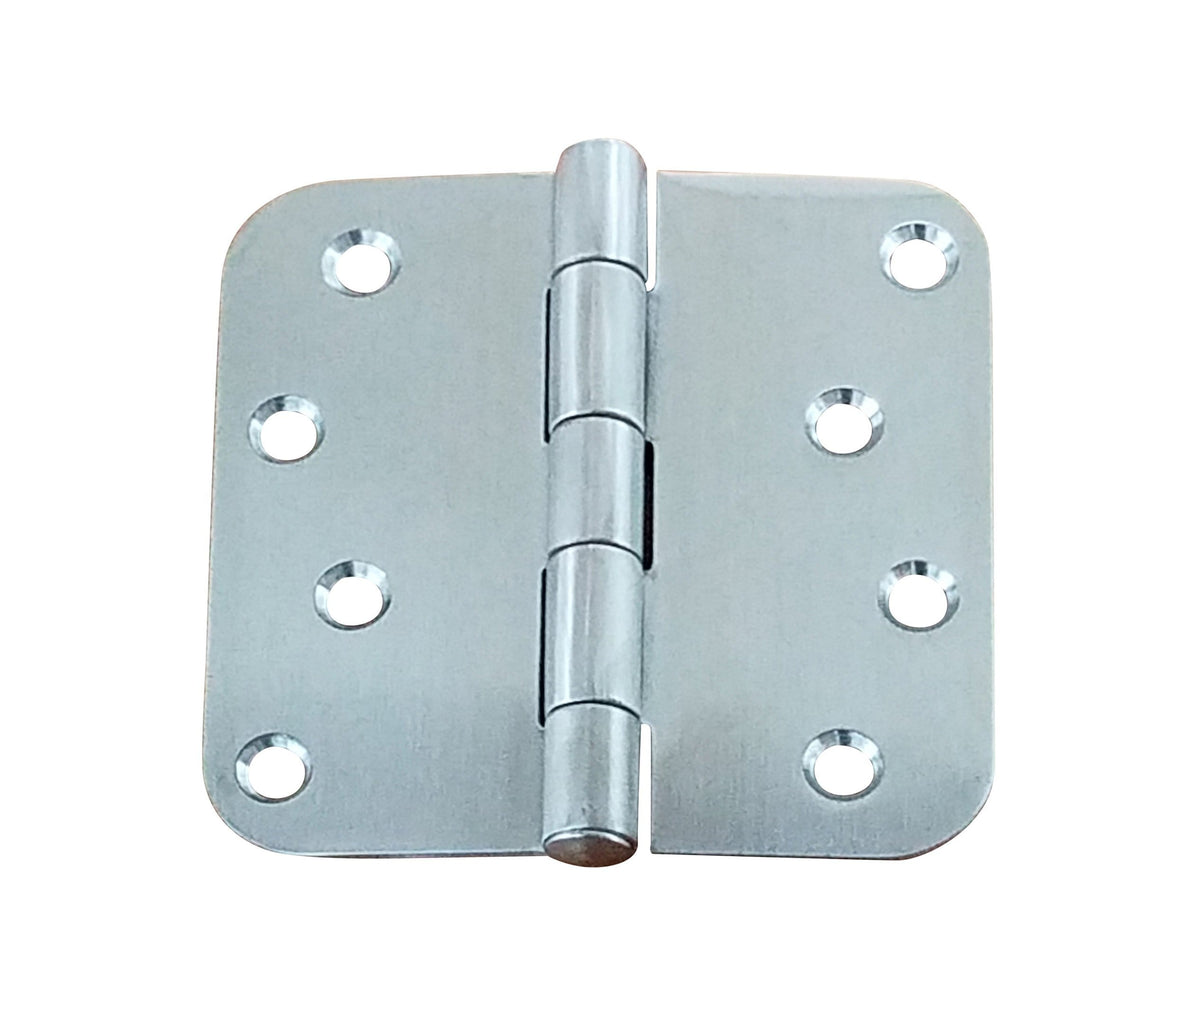 316 Grade Stainless Steel Security Hinges 4" With 5/8" Radius Corner - Highly Rust Resistant - 3 Pack